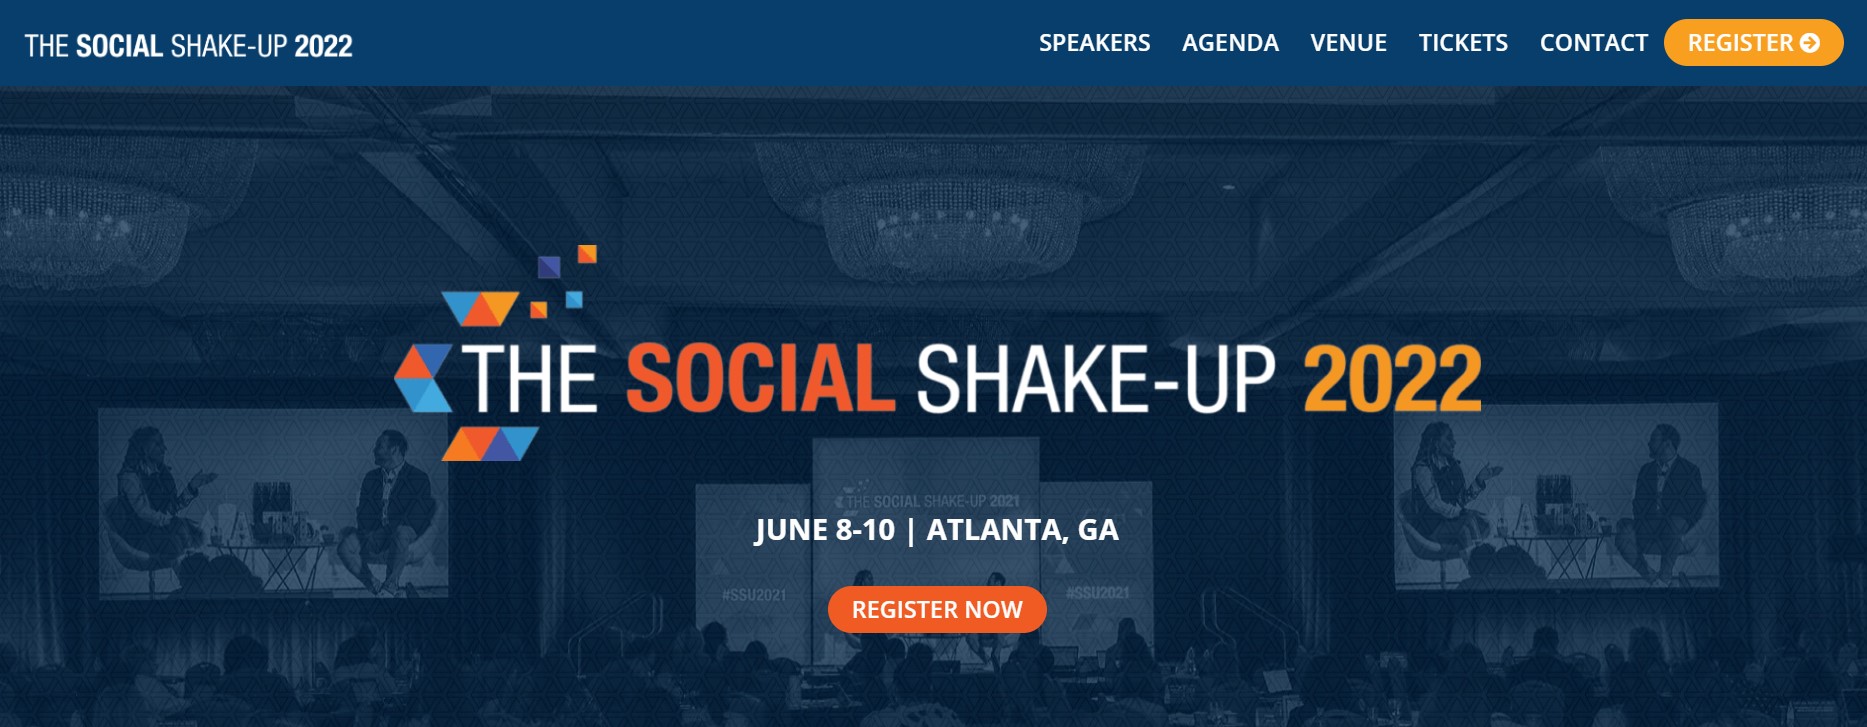 The Social Shake-Up Conference 2022